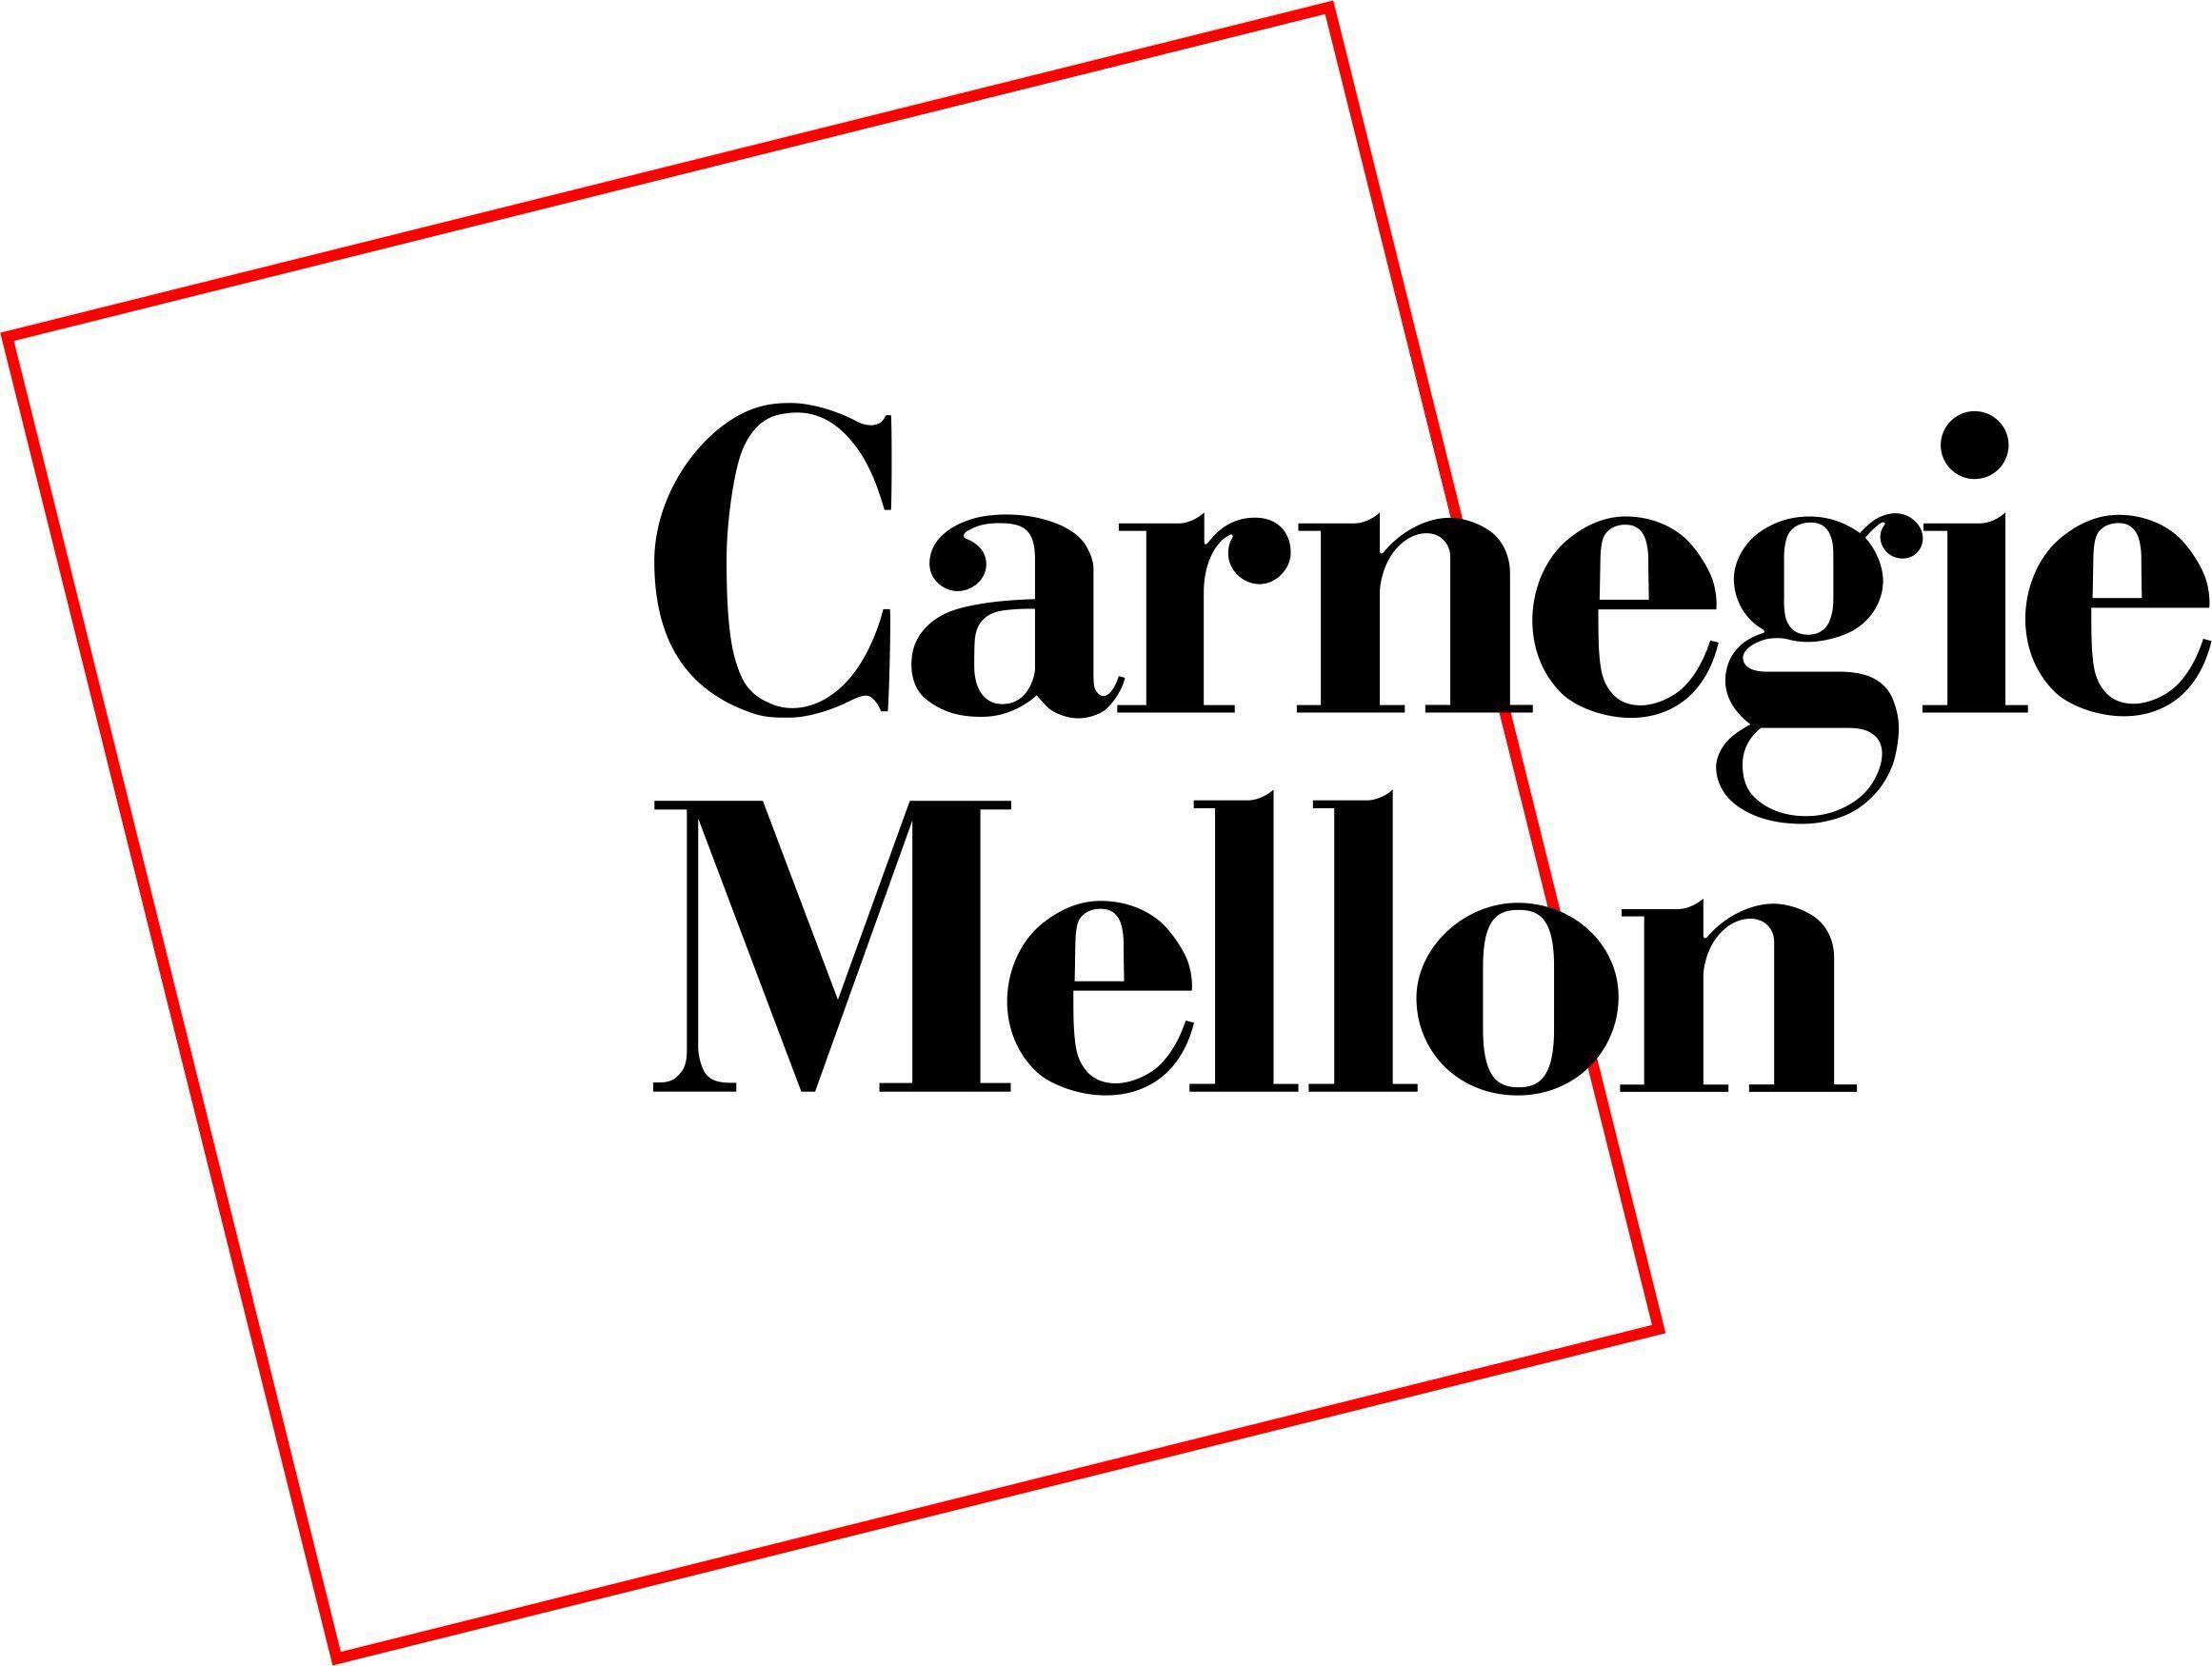 Carnegie Mellon Logo - The Tilted Square – Tinkering Engineer